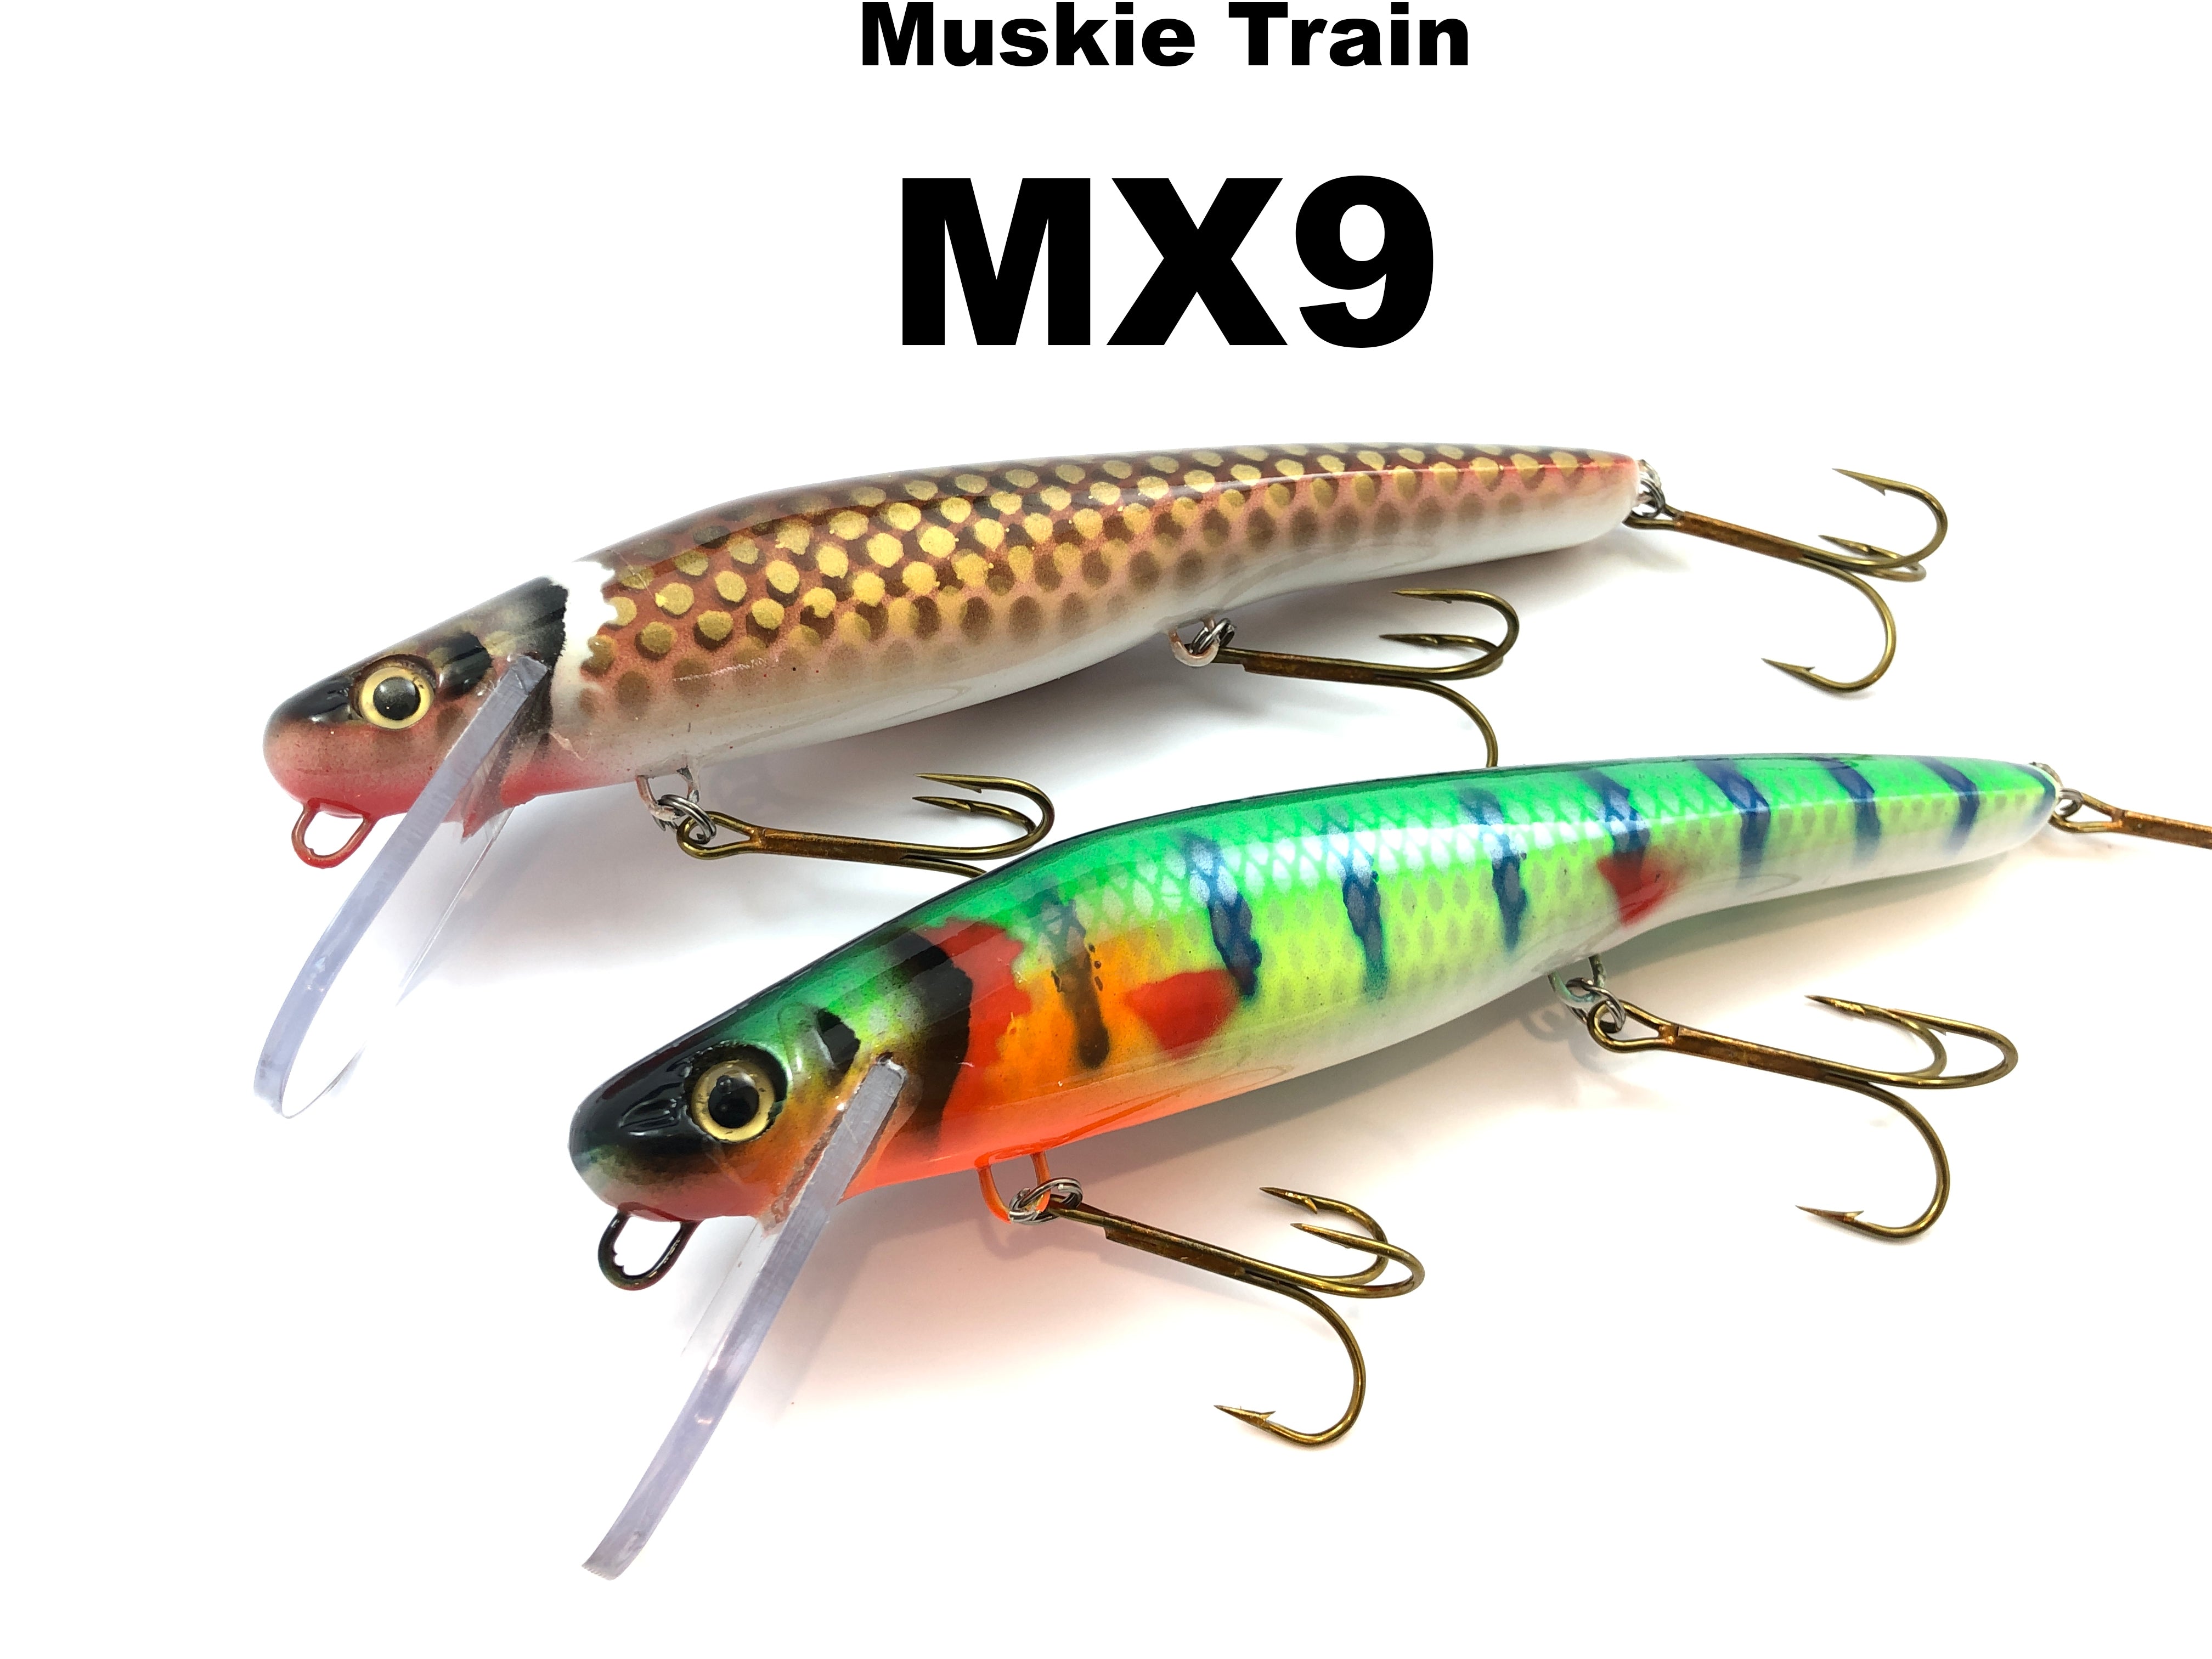 4 Wiley musky lures - Sports & Outdoors